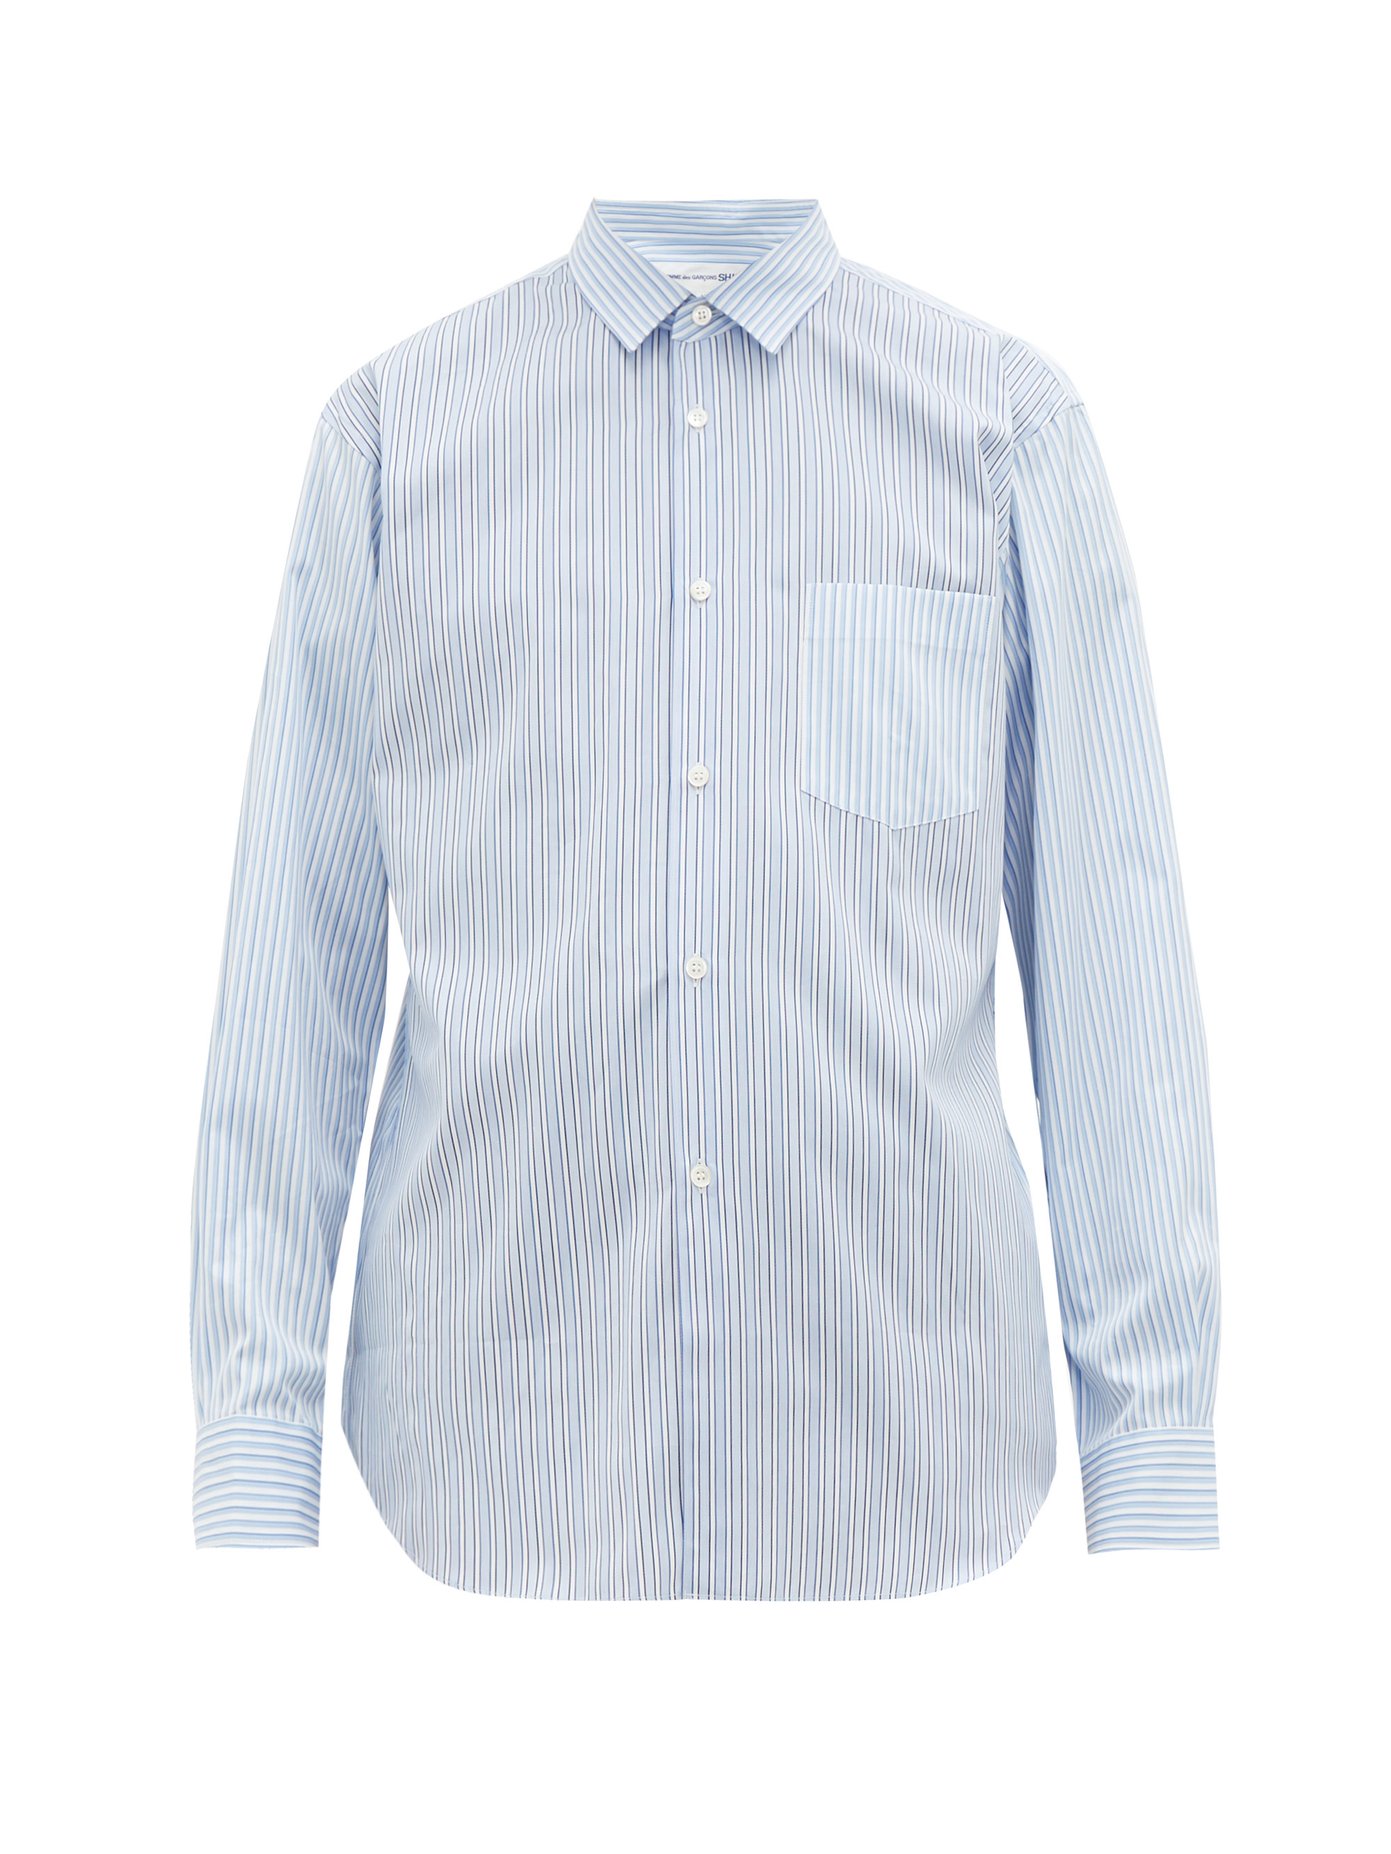 Comme Des Garcons Oxford Shirt Hotsell, 50% OFF | lagence.tv